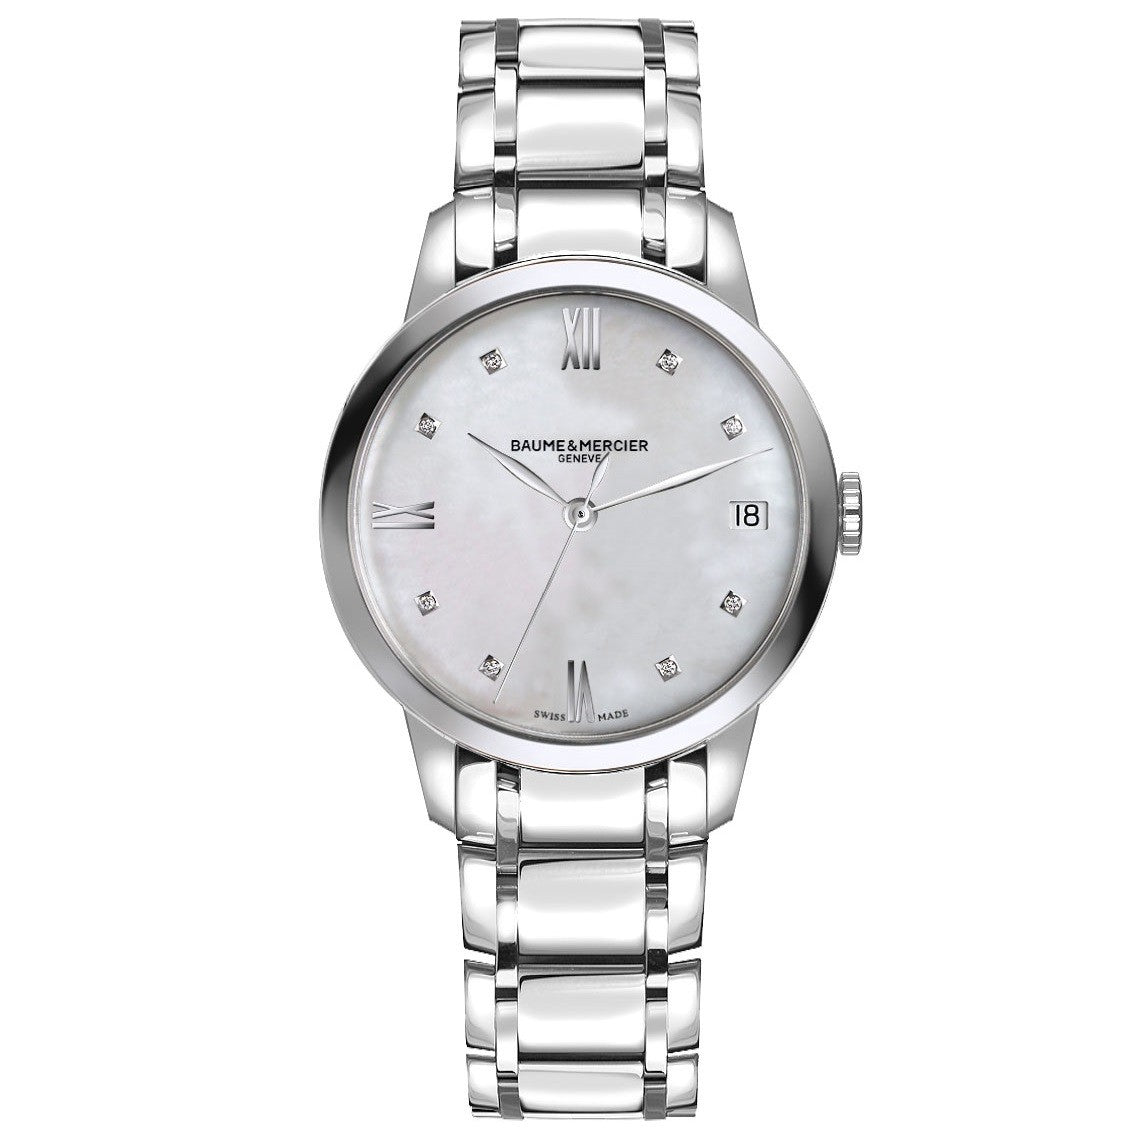 Baume & Mercier Classima Quartz Stainless Steel Mother of Pearl Dial Ladies Watch 10326